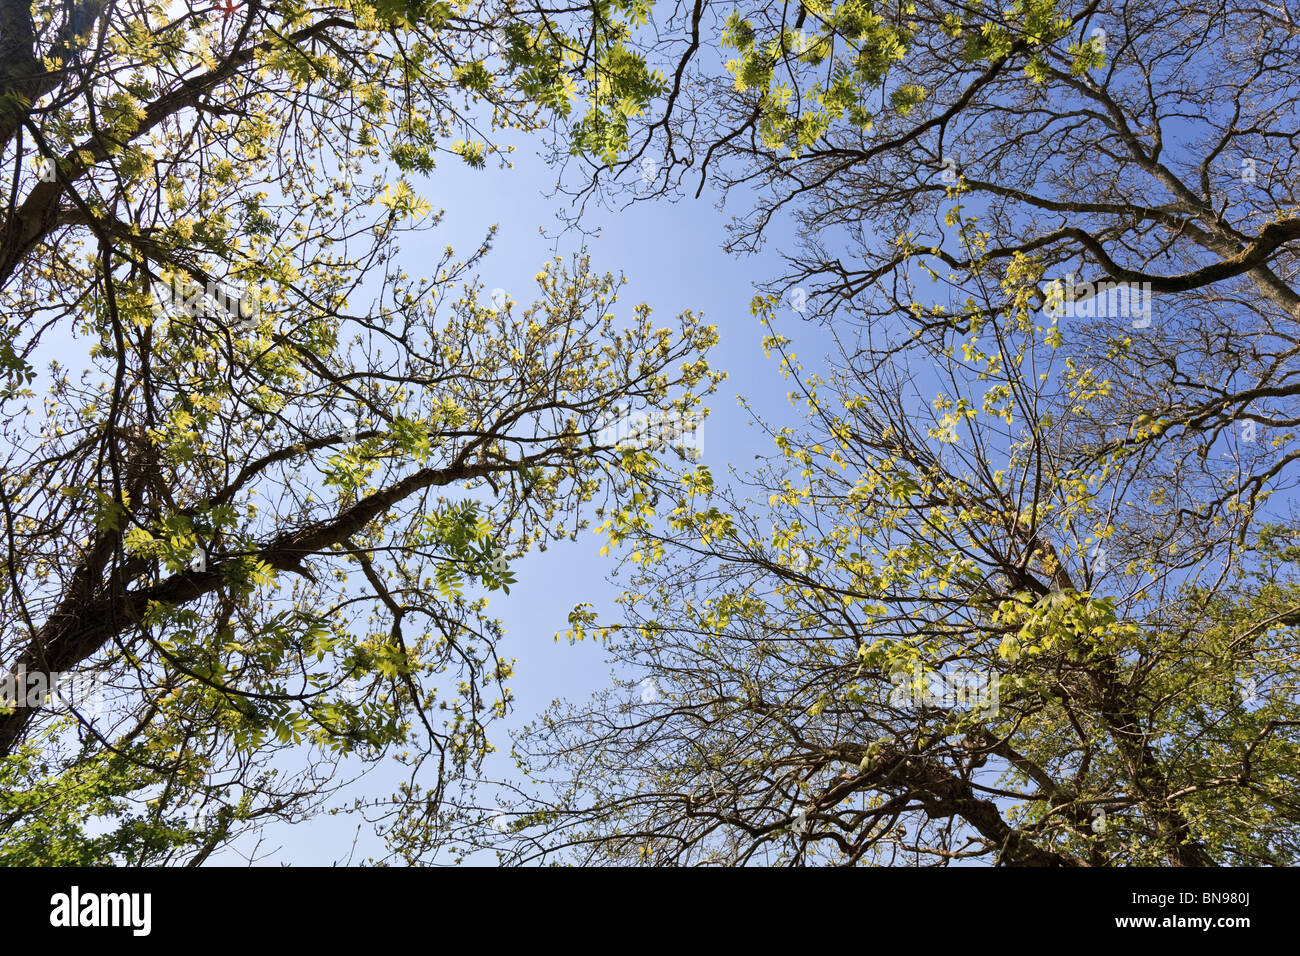 New growth on trees in Deciduous woodland with blue sky background Stock Photo